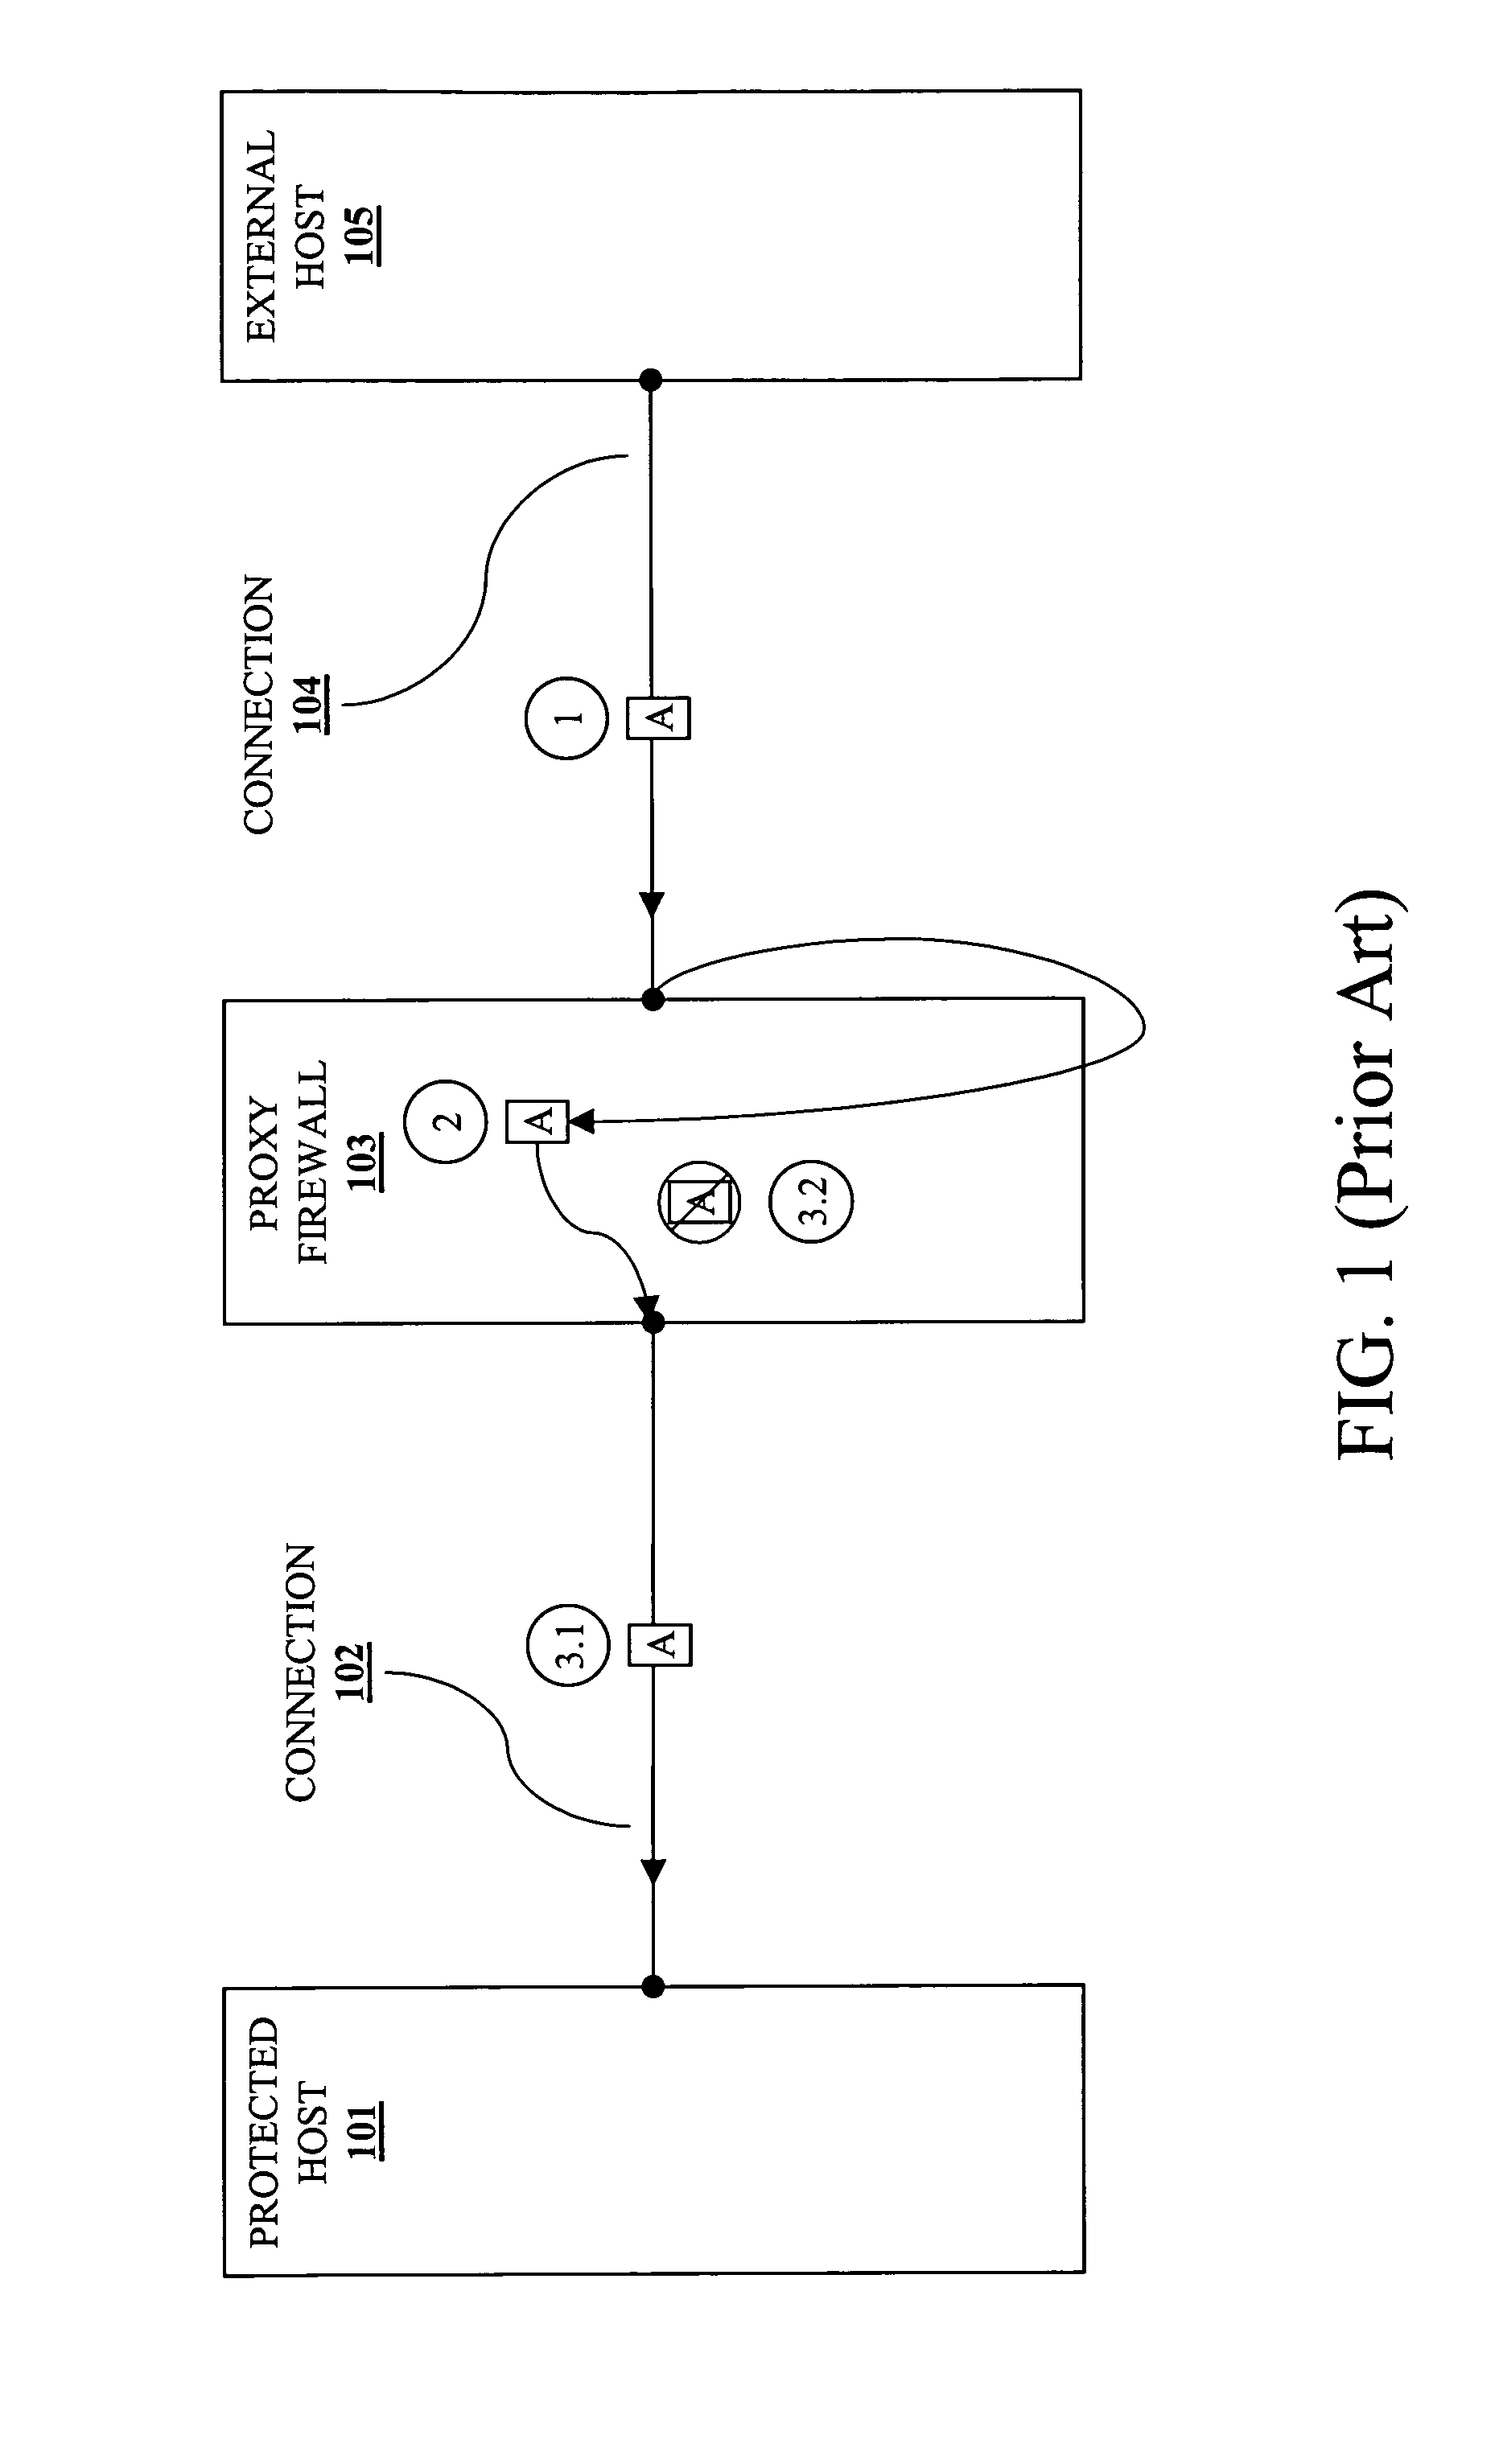 Method and apparatus for datastream analysis and blocking